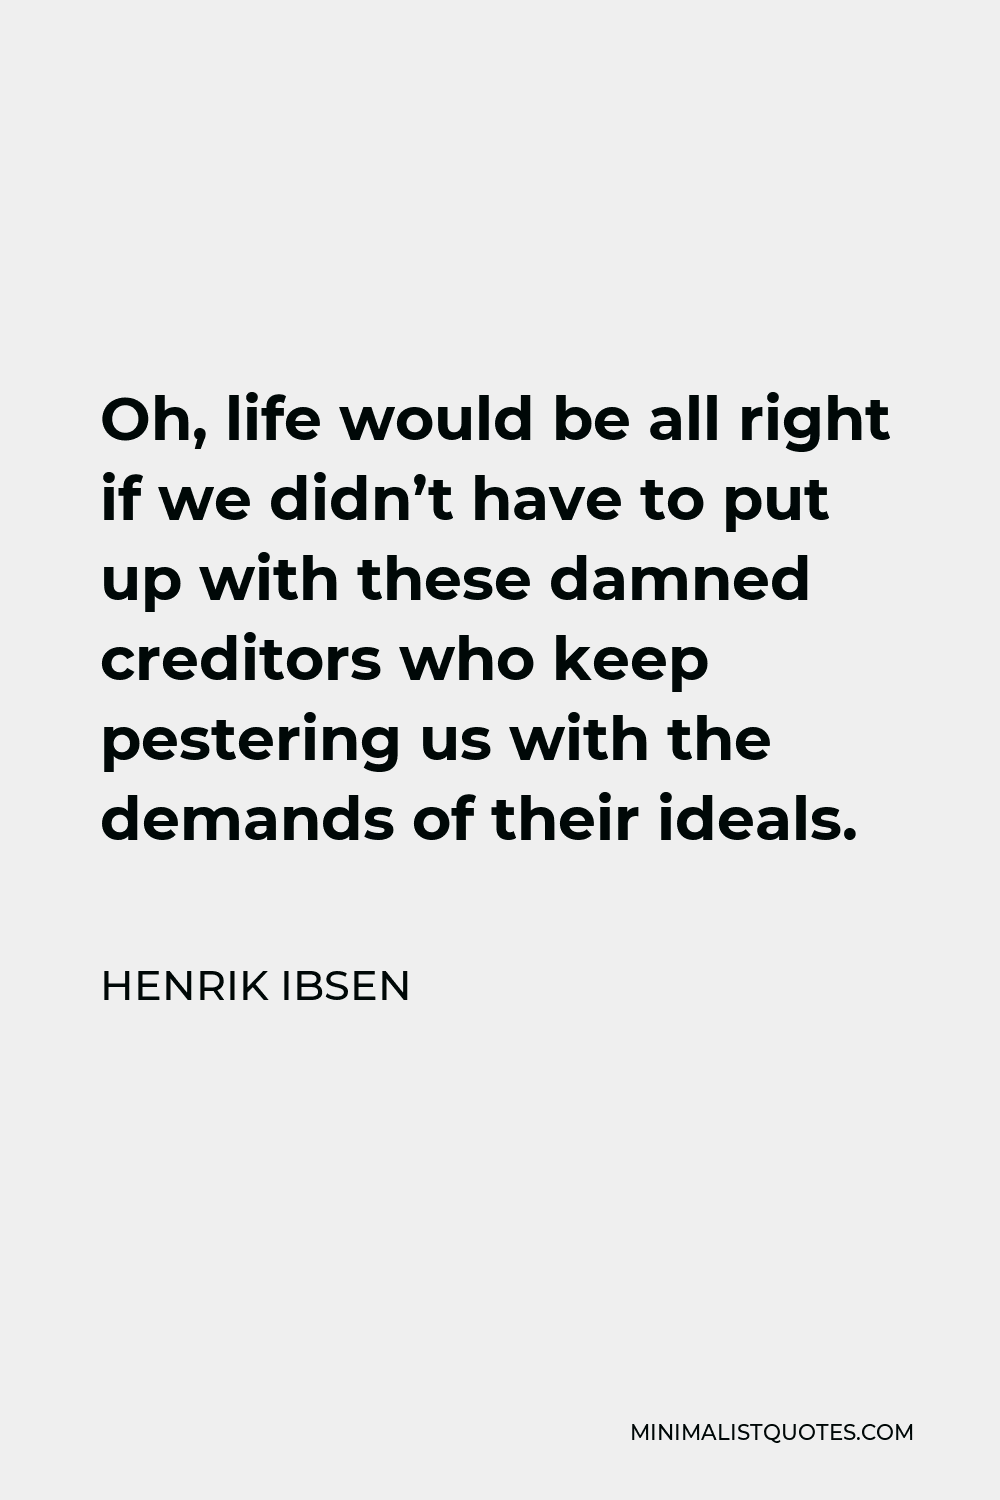 Henrik Ibsen Quote - Oh, life would be all right if we didn’t have to put up with these damned creditors who keep pestering us with the demands of their ideals.